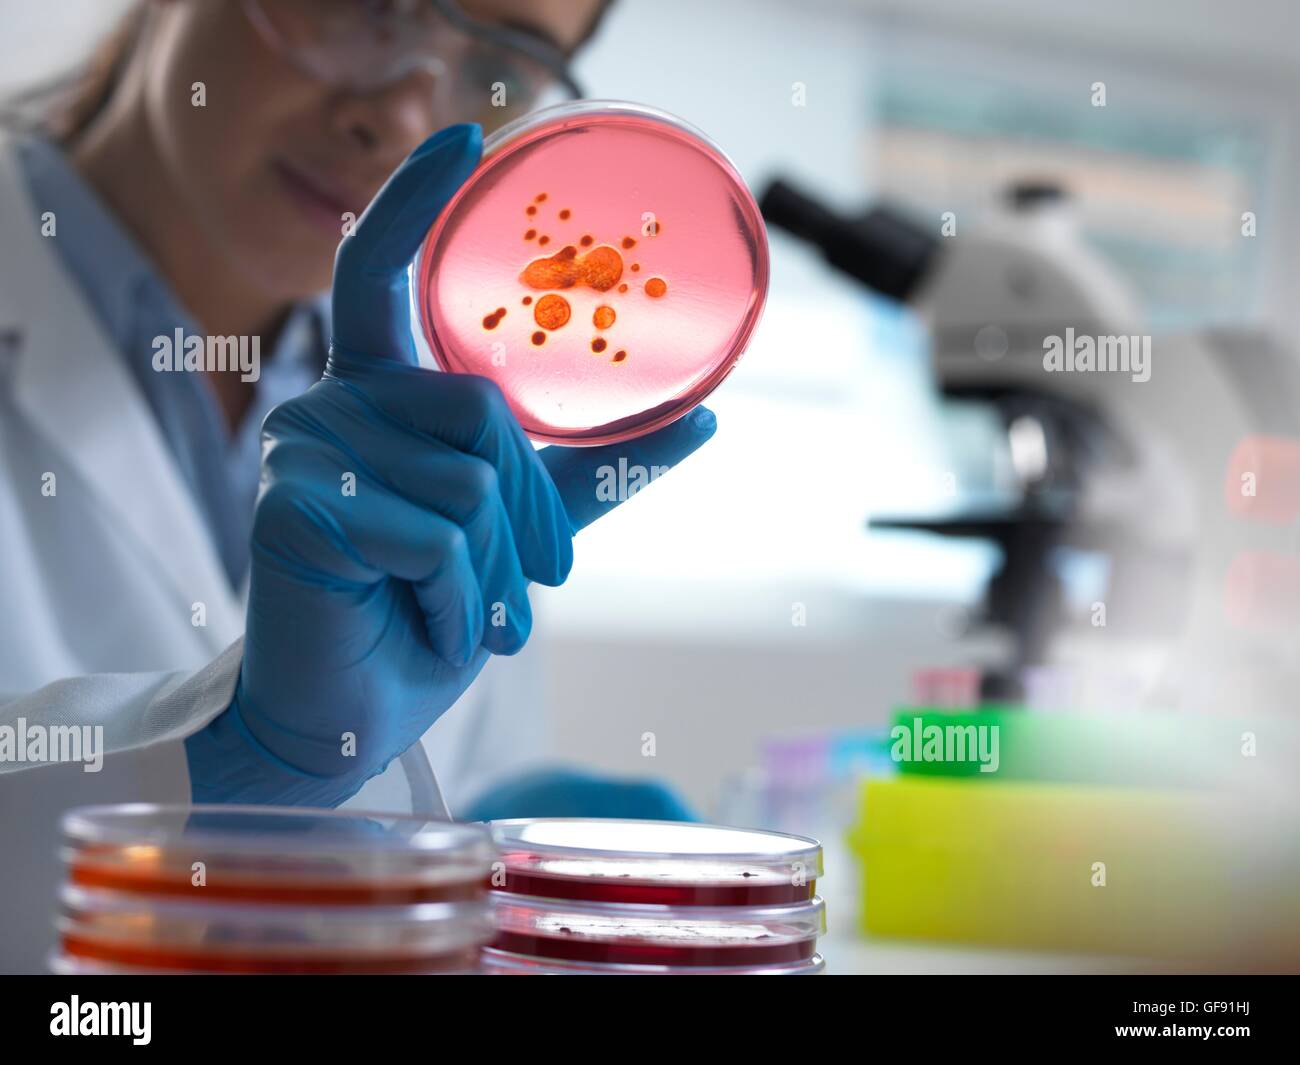 PROPERTY RELEASED. MODEL RELEASED. Scientist examining microbiological cultures in a petri dish. Stock Photo